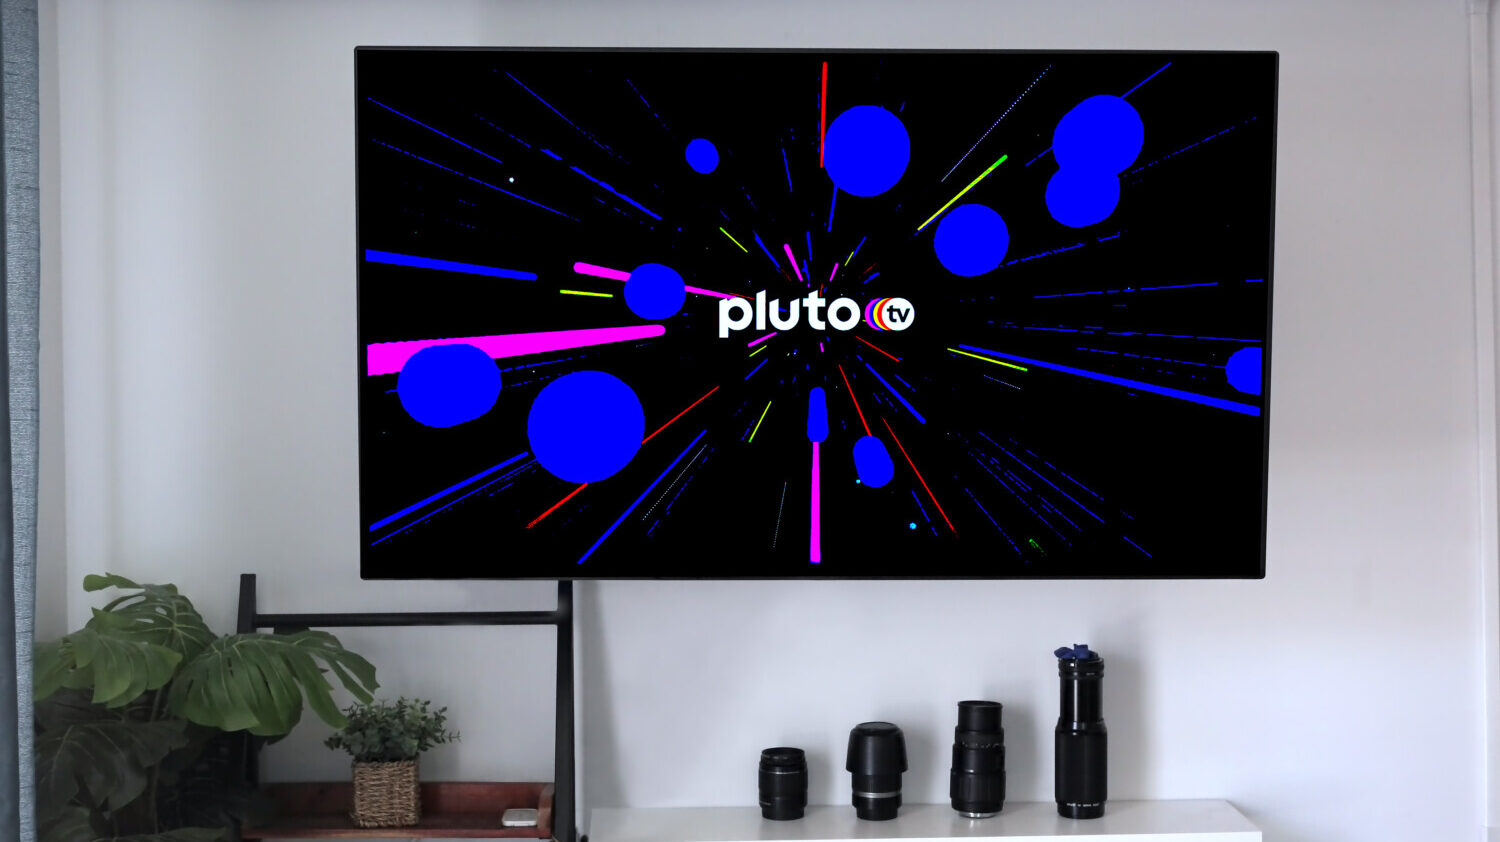 Pluto TV home screen appears on television